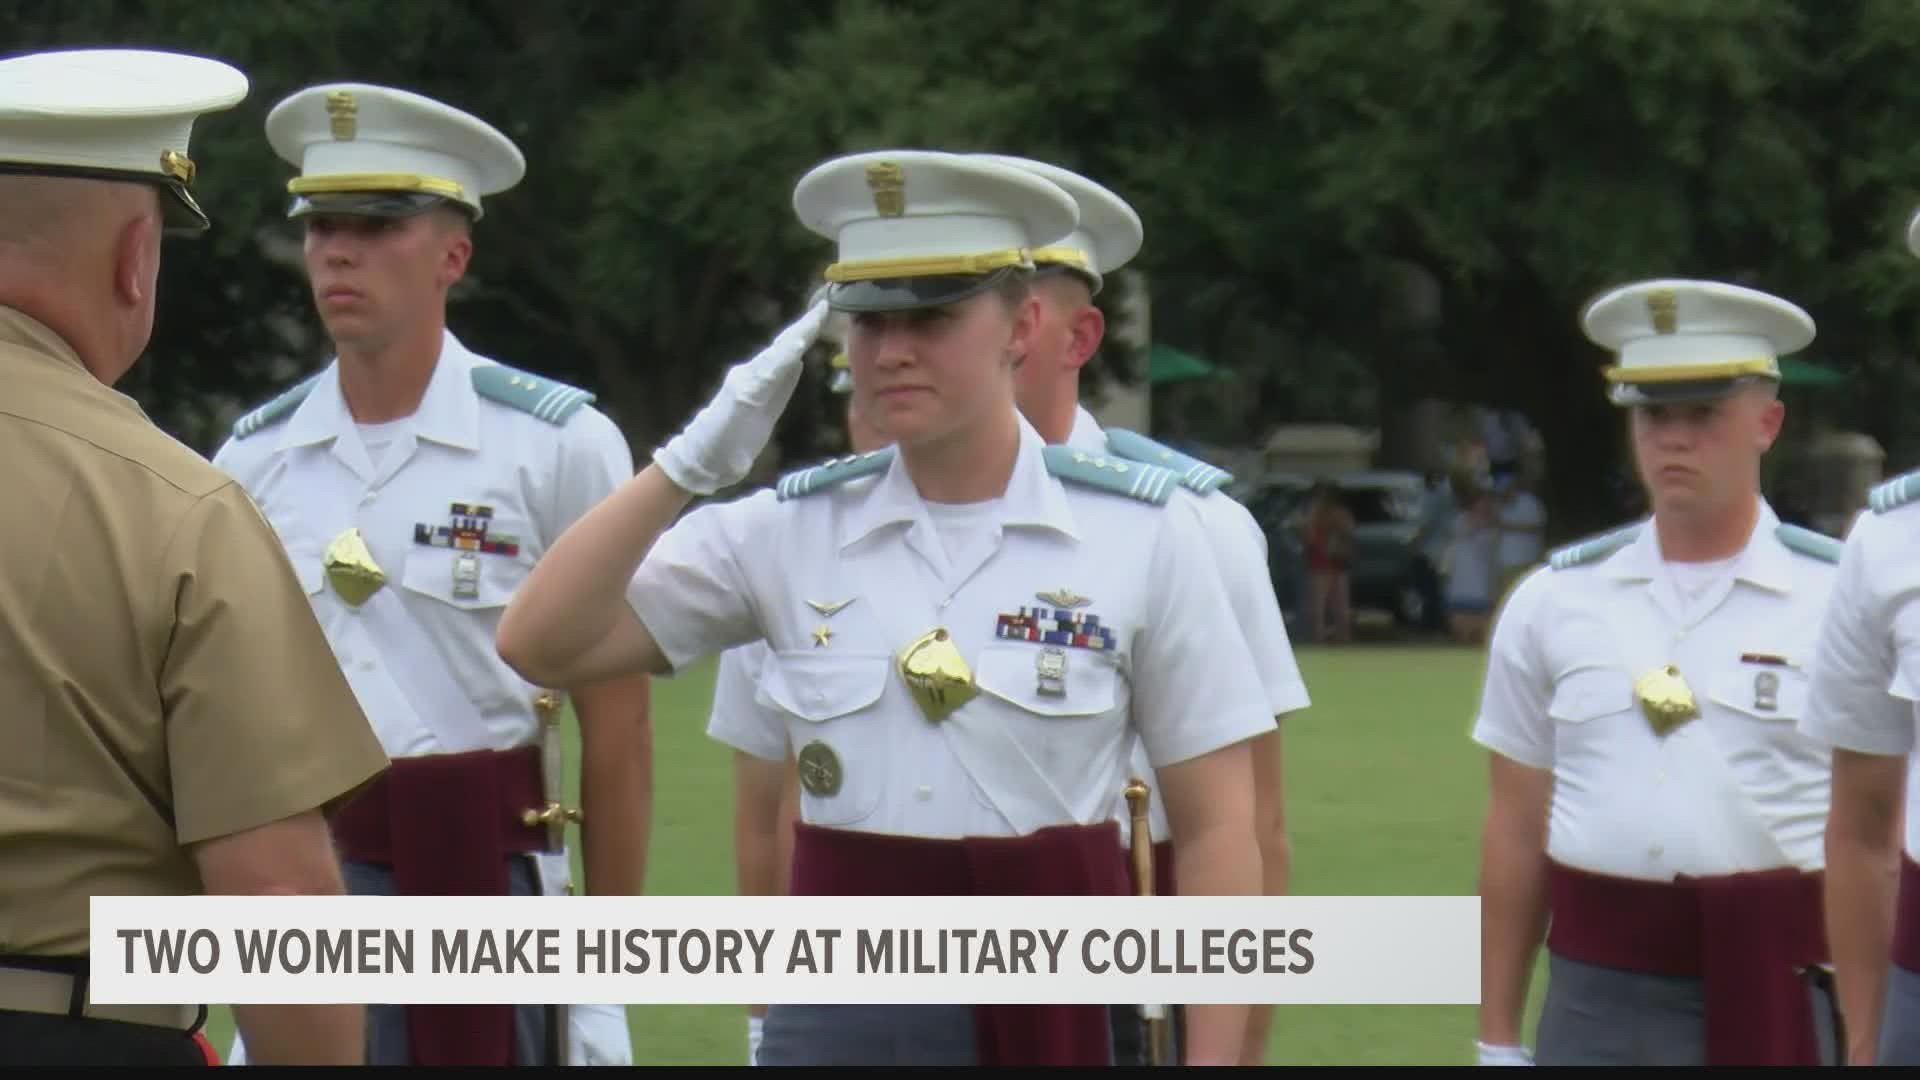 For the first time, the senior military corps cadets at Citadel and Virginia Military Institute are commanded by women.